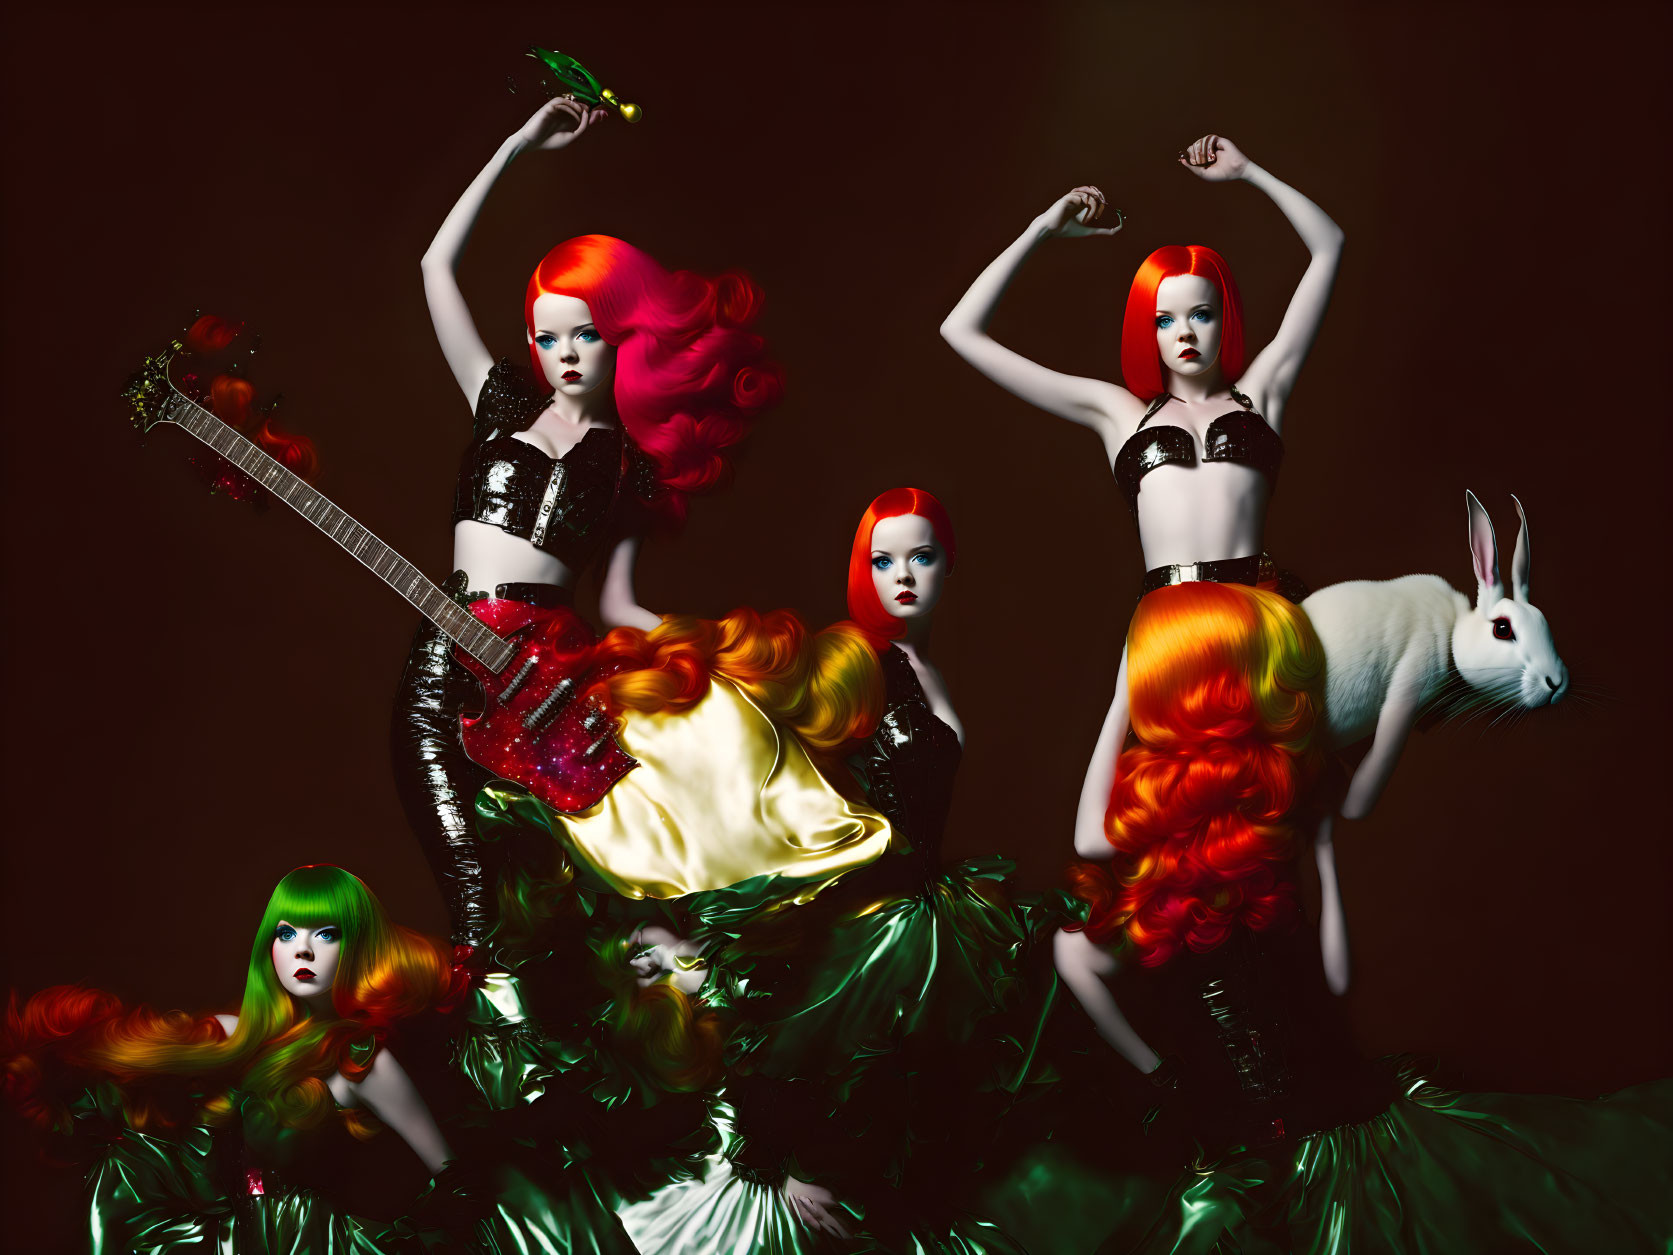 Colorful Hair and Extravagant Costumes: Surrealist Band Poses with Guitar and Rabbit